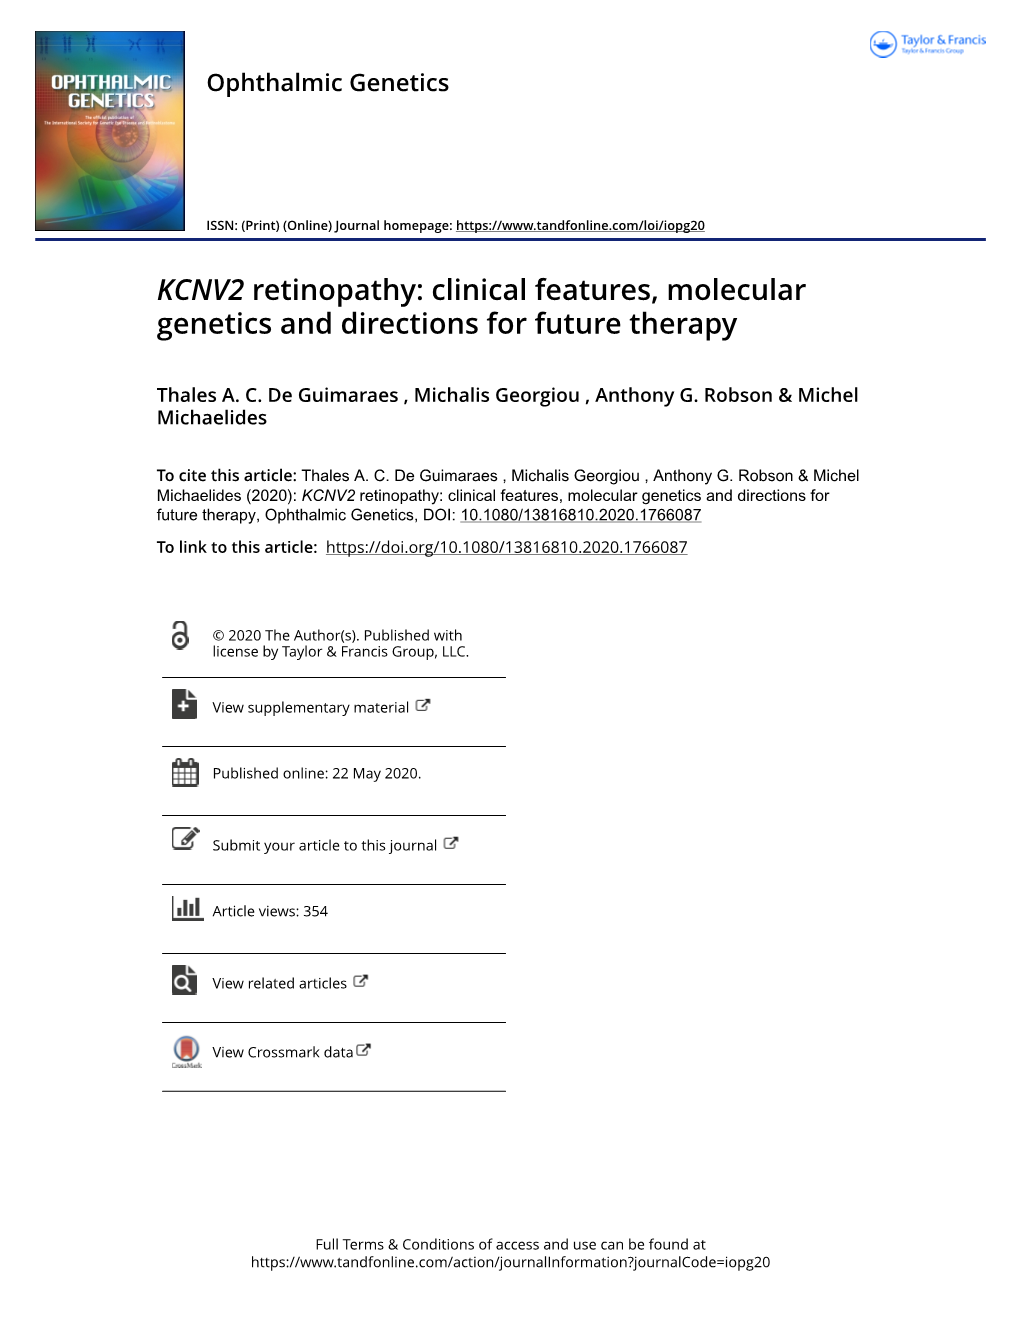 KCNV2 Retinopathy: Clinical Features, Molecular Genetics and Directions for Future Therapy